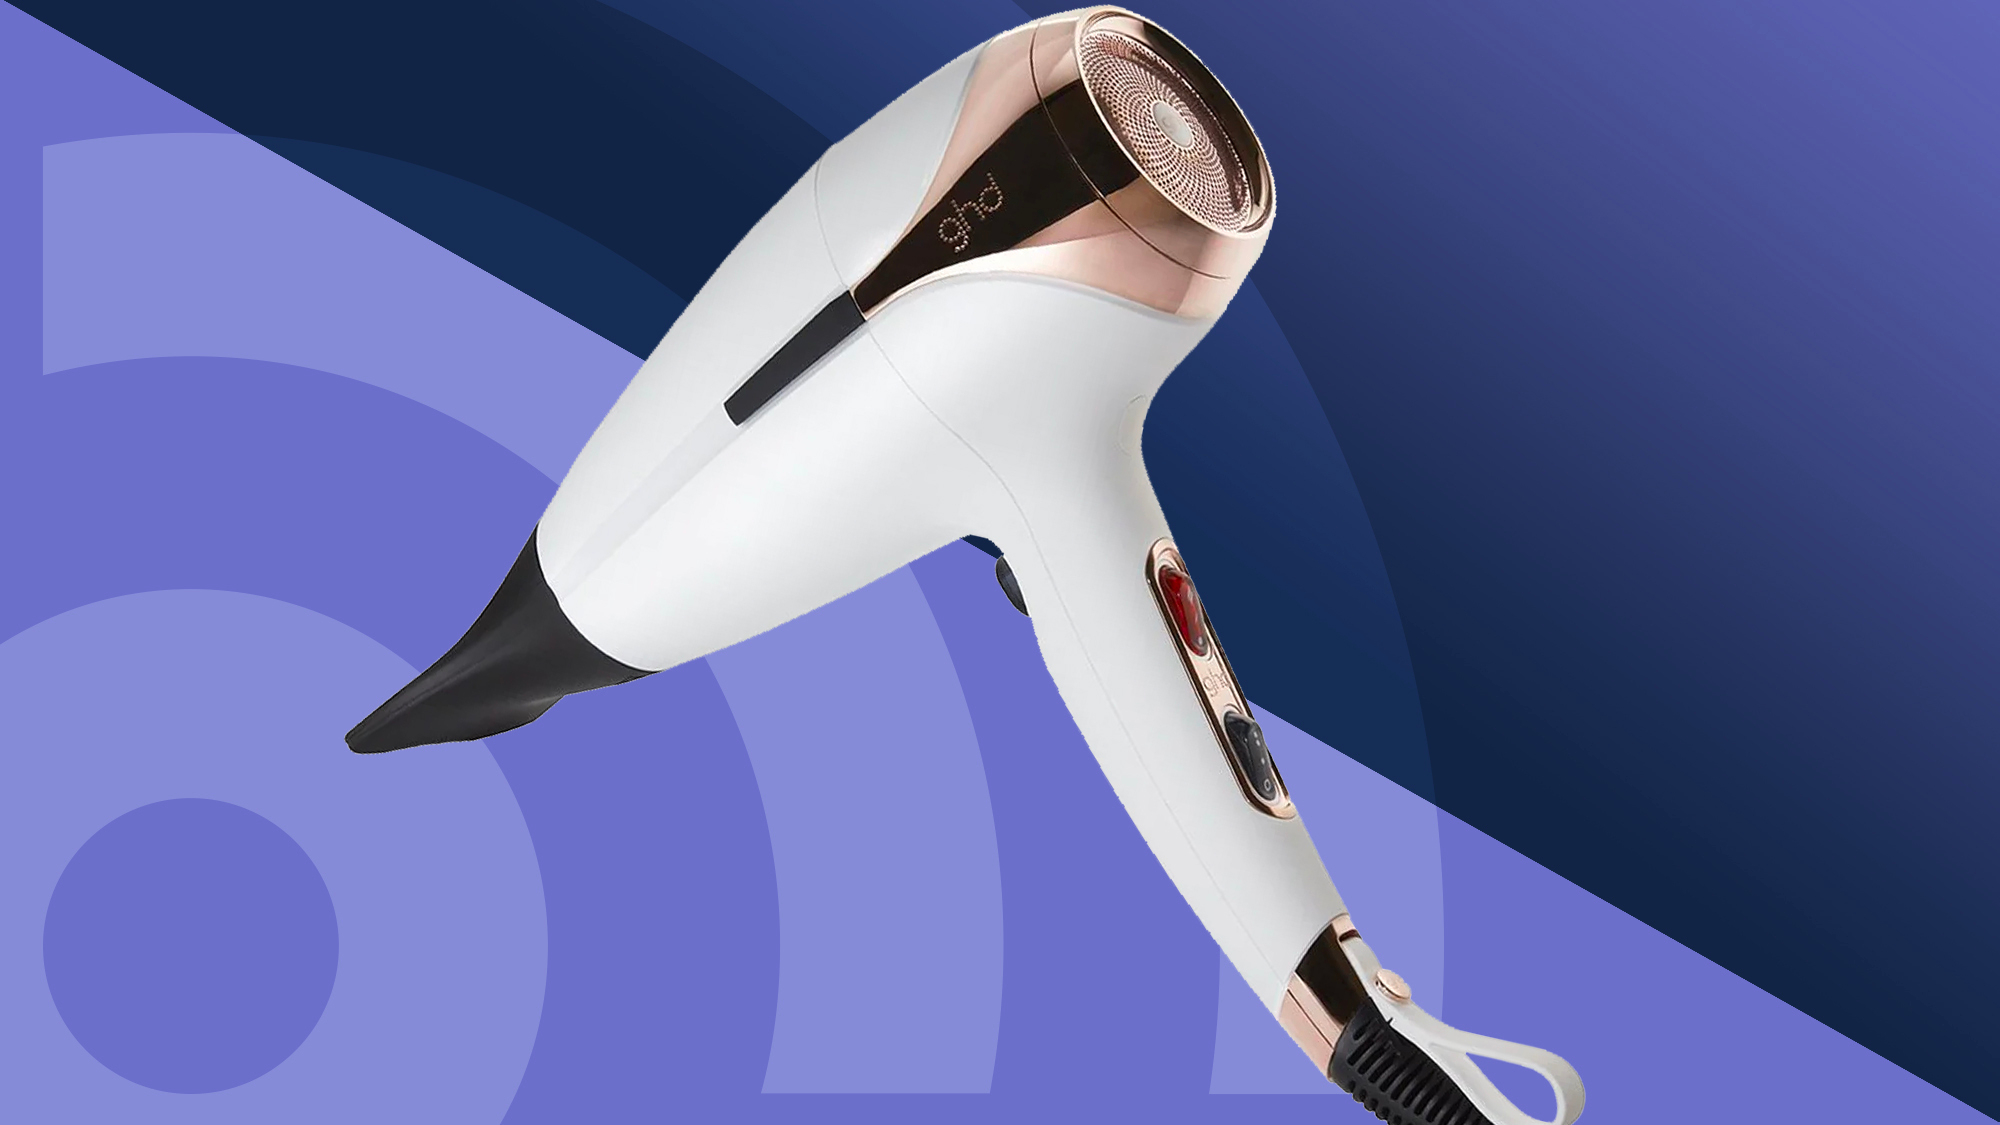 BSC, Inc. - #gamaiqperfetto is also the BEST hairdryer for men! See how in  GQ's article😉 https://www.gq-magazine.co.uk/gallery/best-hair-dryer-men?image=5efb3d1f90f3f47442ebcfc8  . . @gamaitaly.it #gamaitaly #gamaiq #gamaiqprofessional #gamaiqperfetto ...